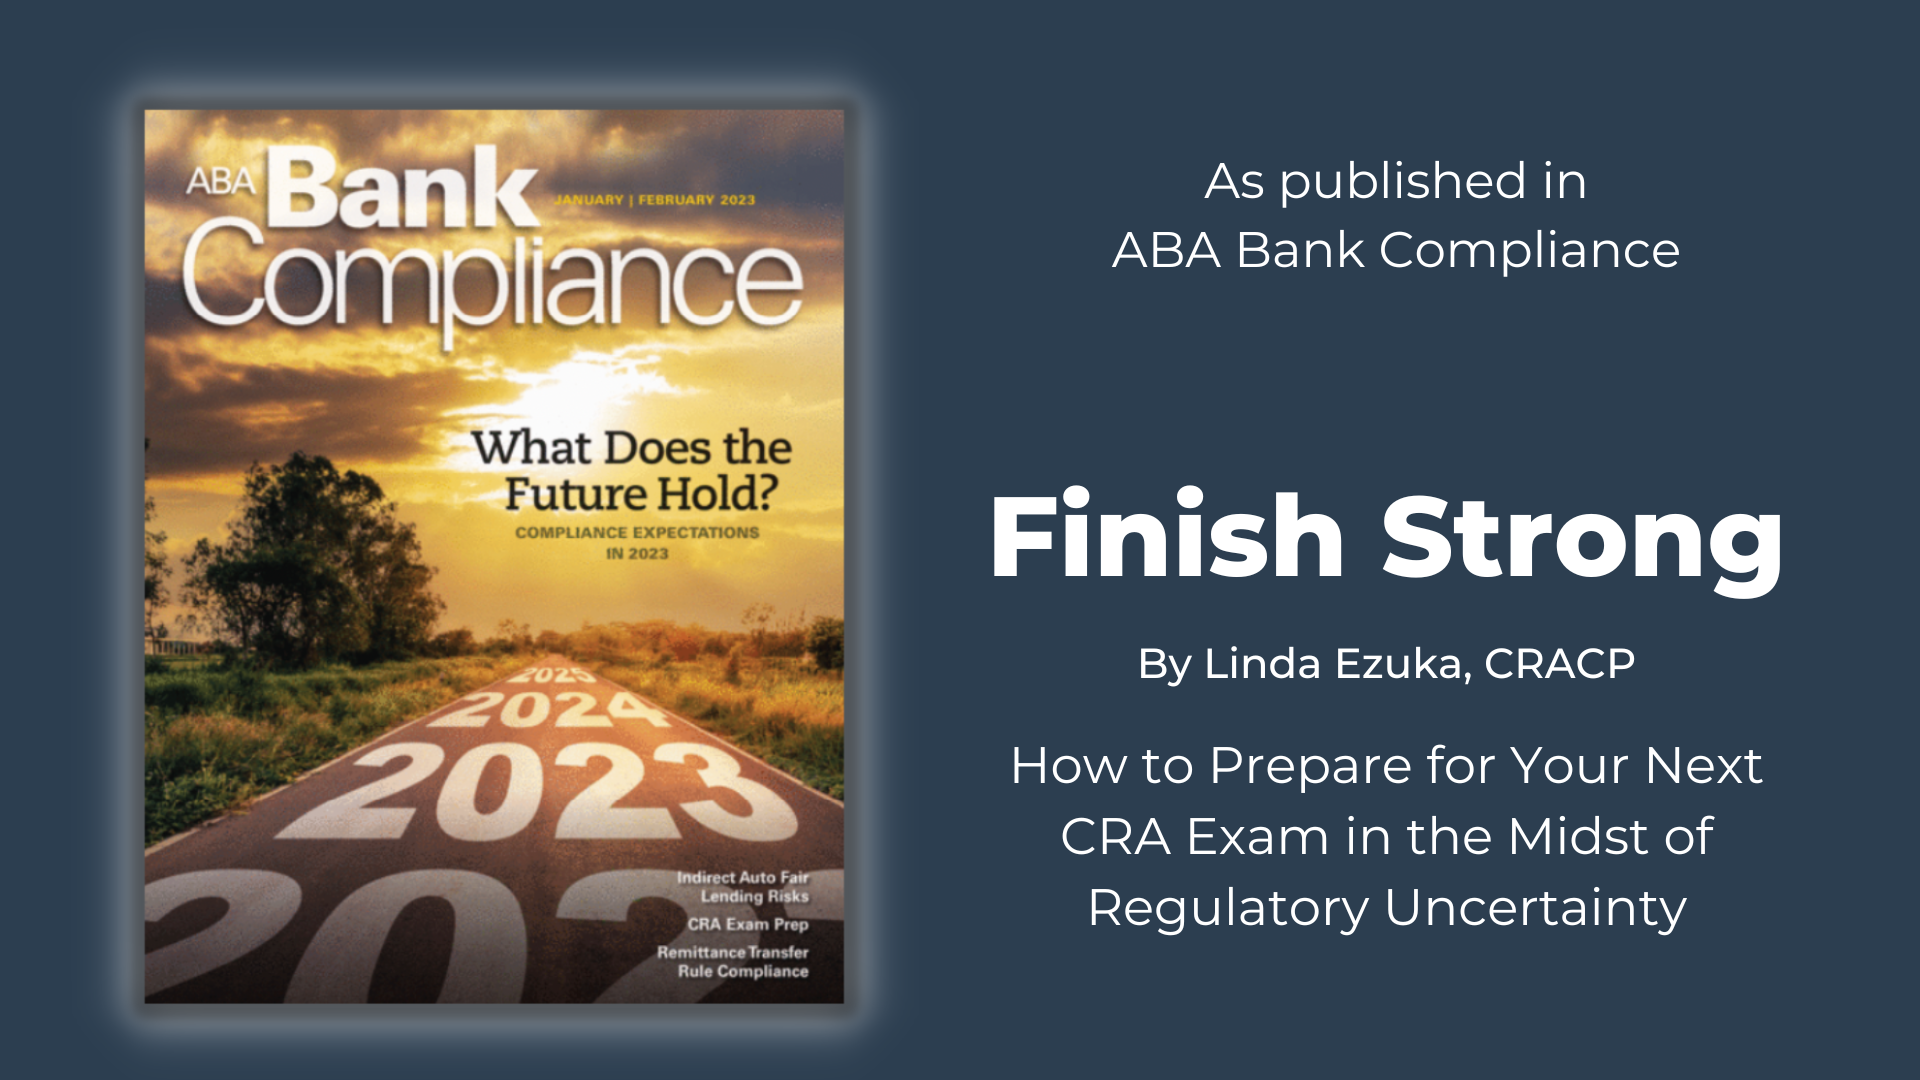 Finish Strong, as published in ABA Bank Compliance